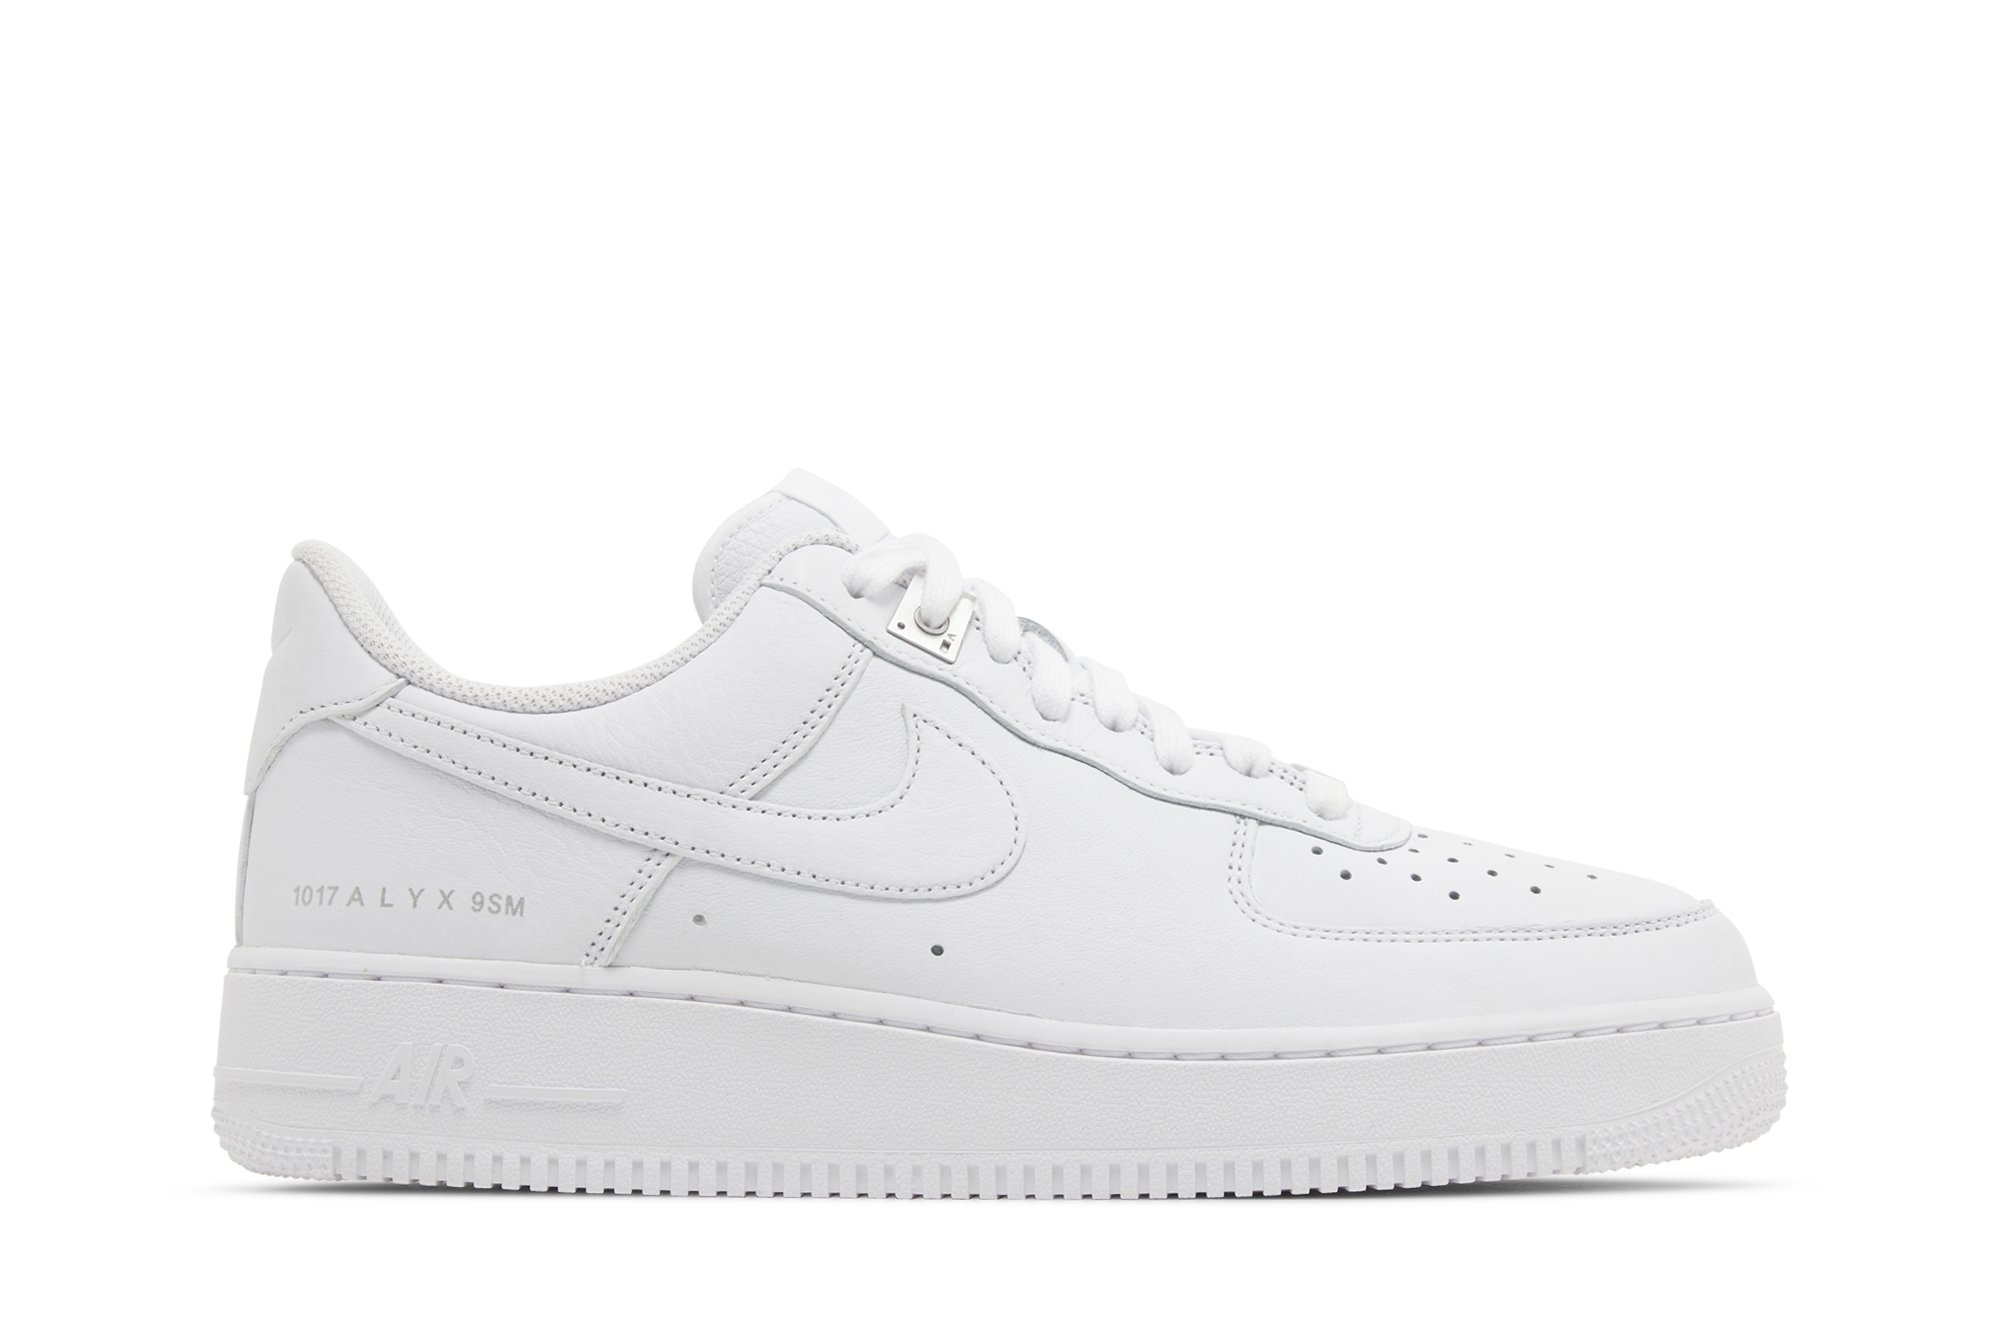 1017 ALYX 9SM Nike Air Force 1 Low 